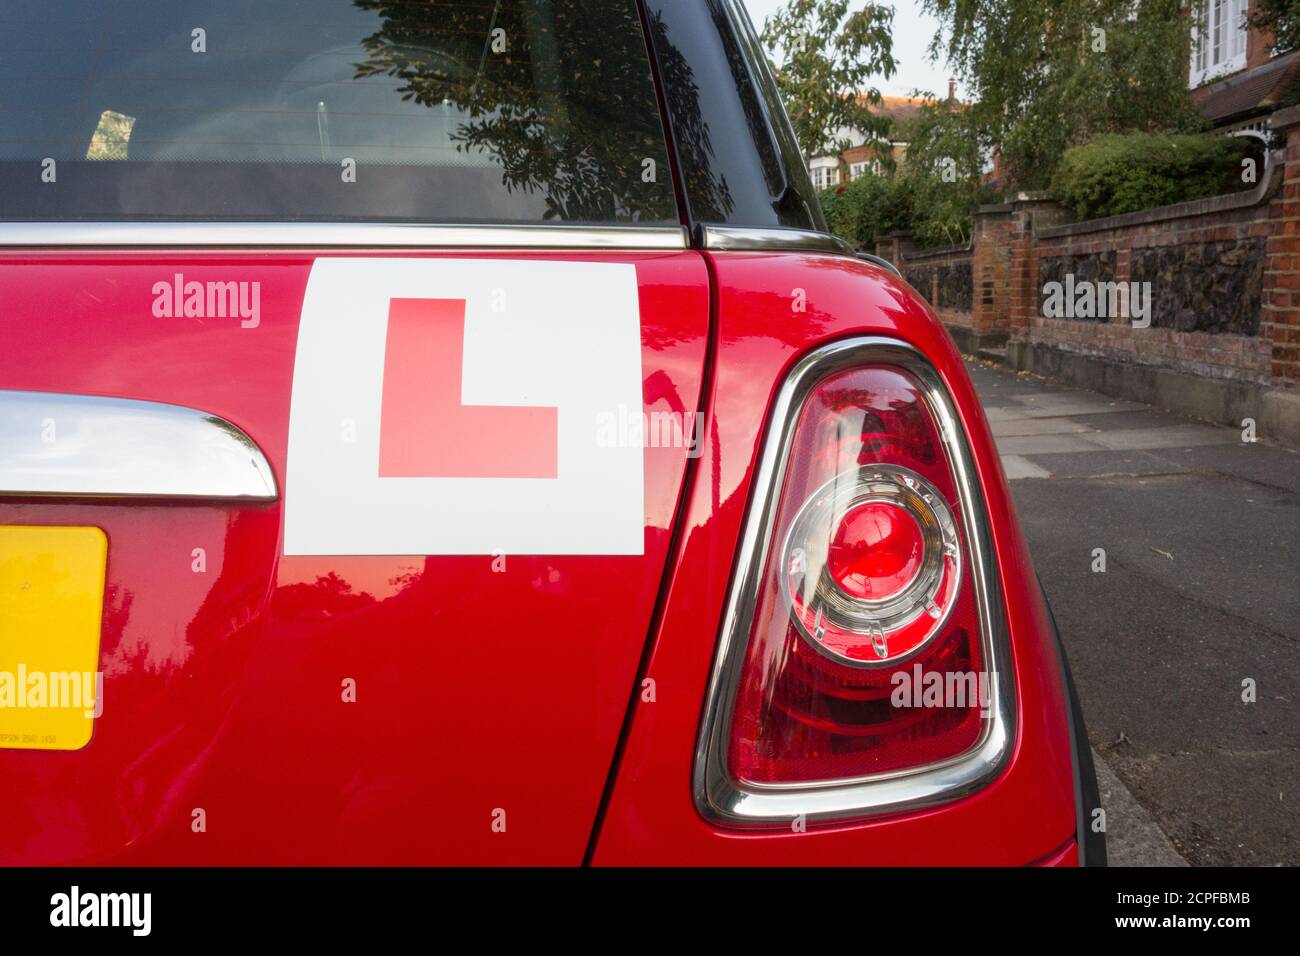 Closeup of L Plates on a red BMW Mini Cooper Hatch car Stock Photo